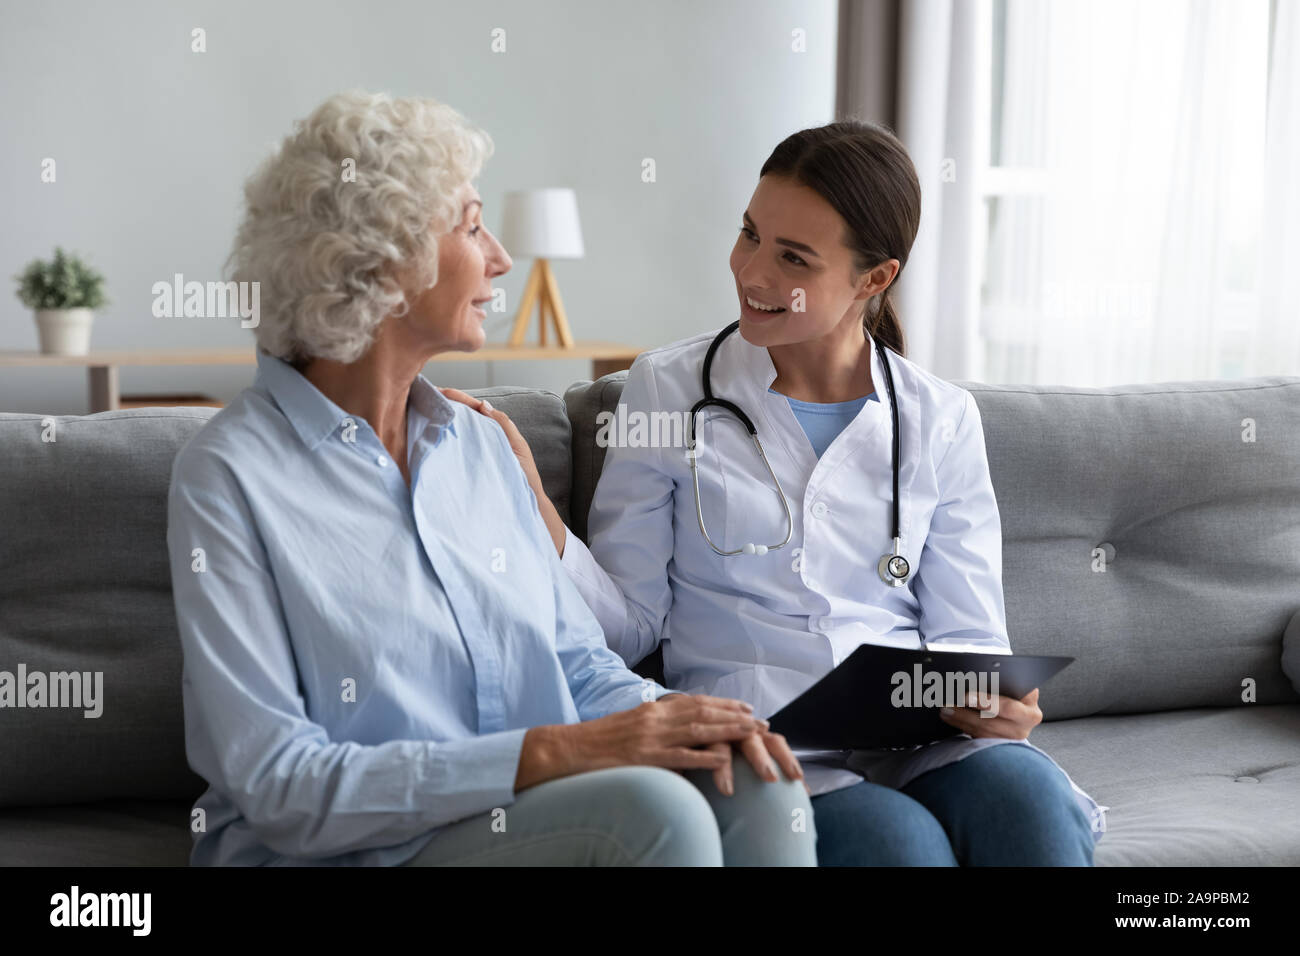 Caring young woman nurse helping supporting old adult grandmother patient Stock Photo